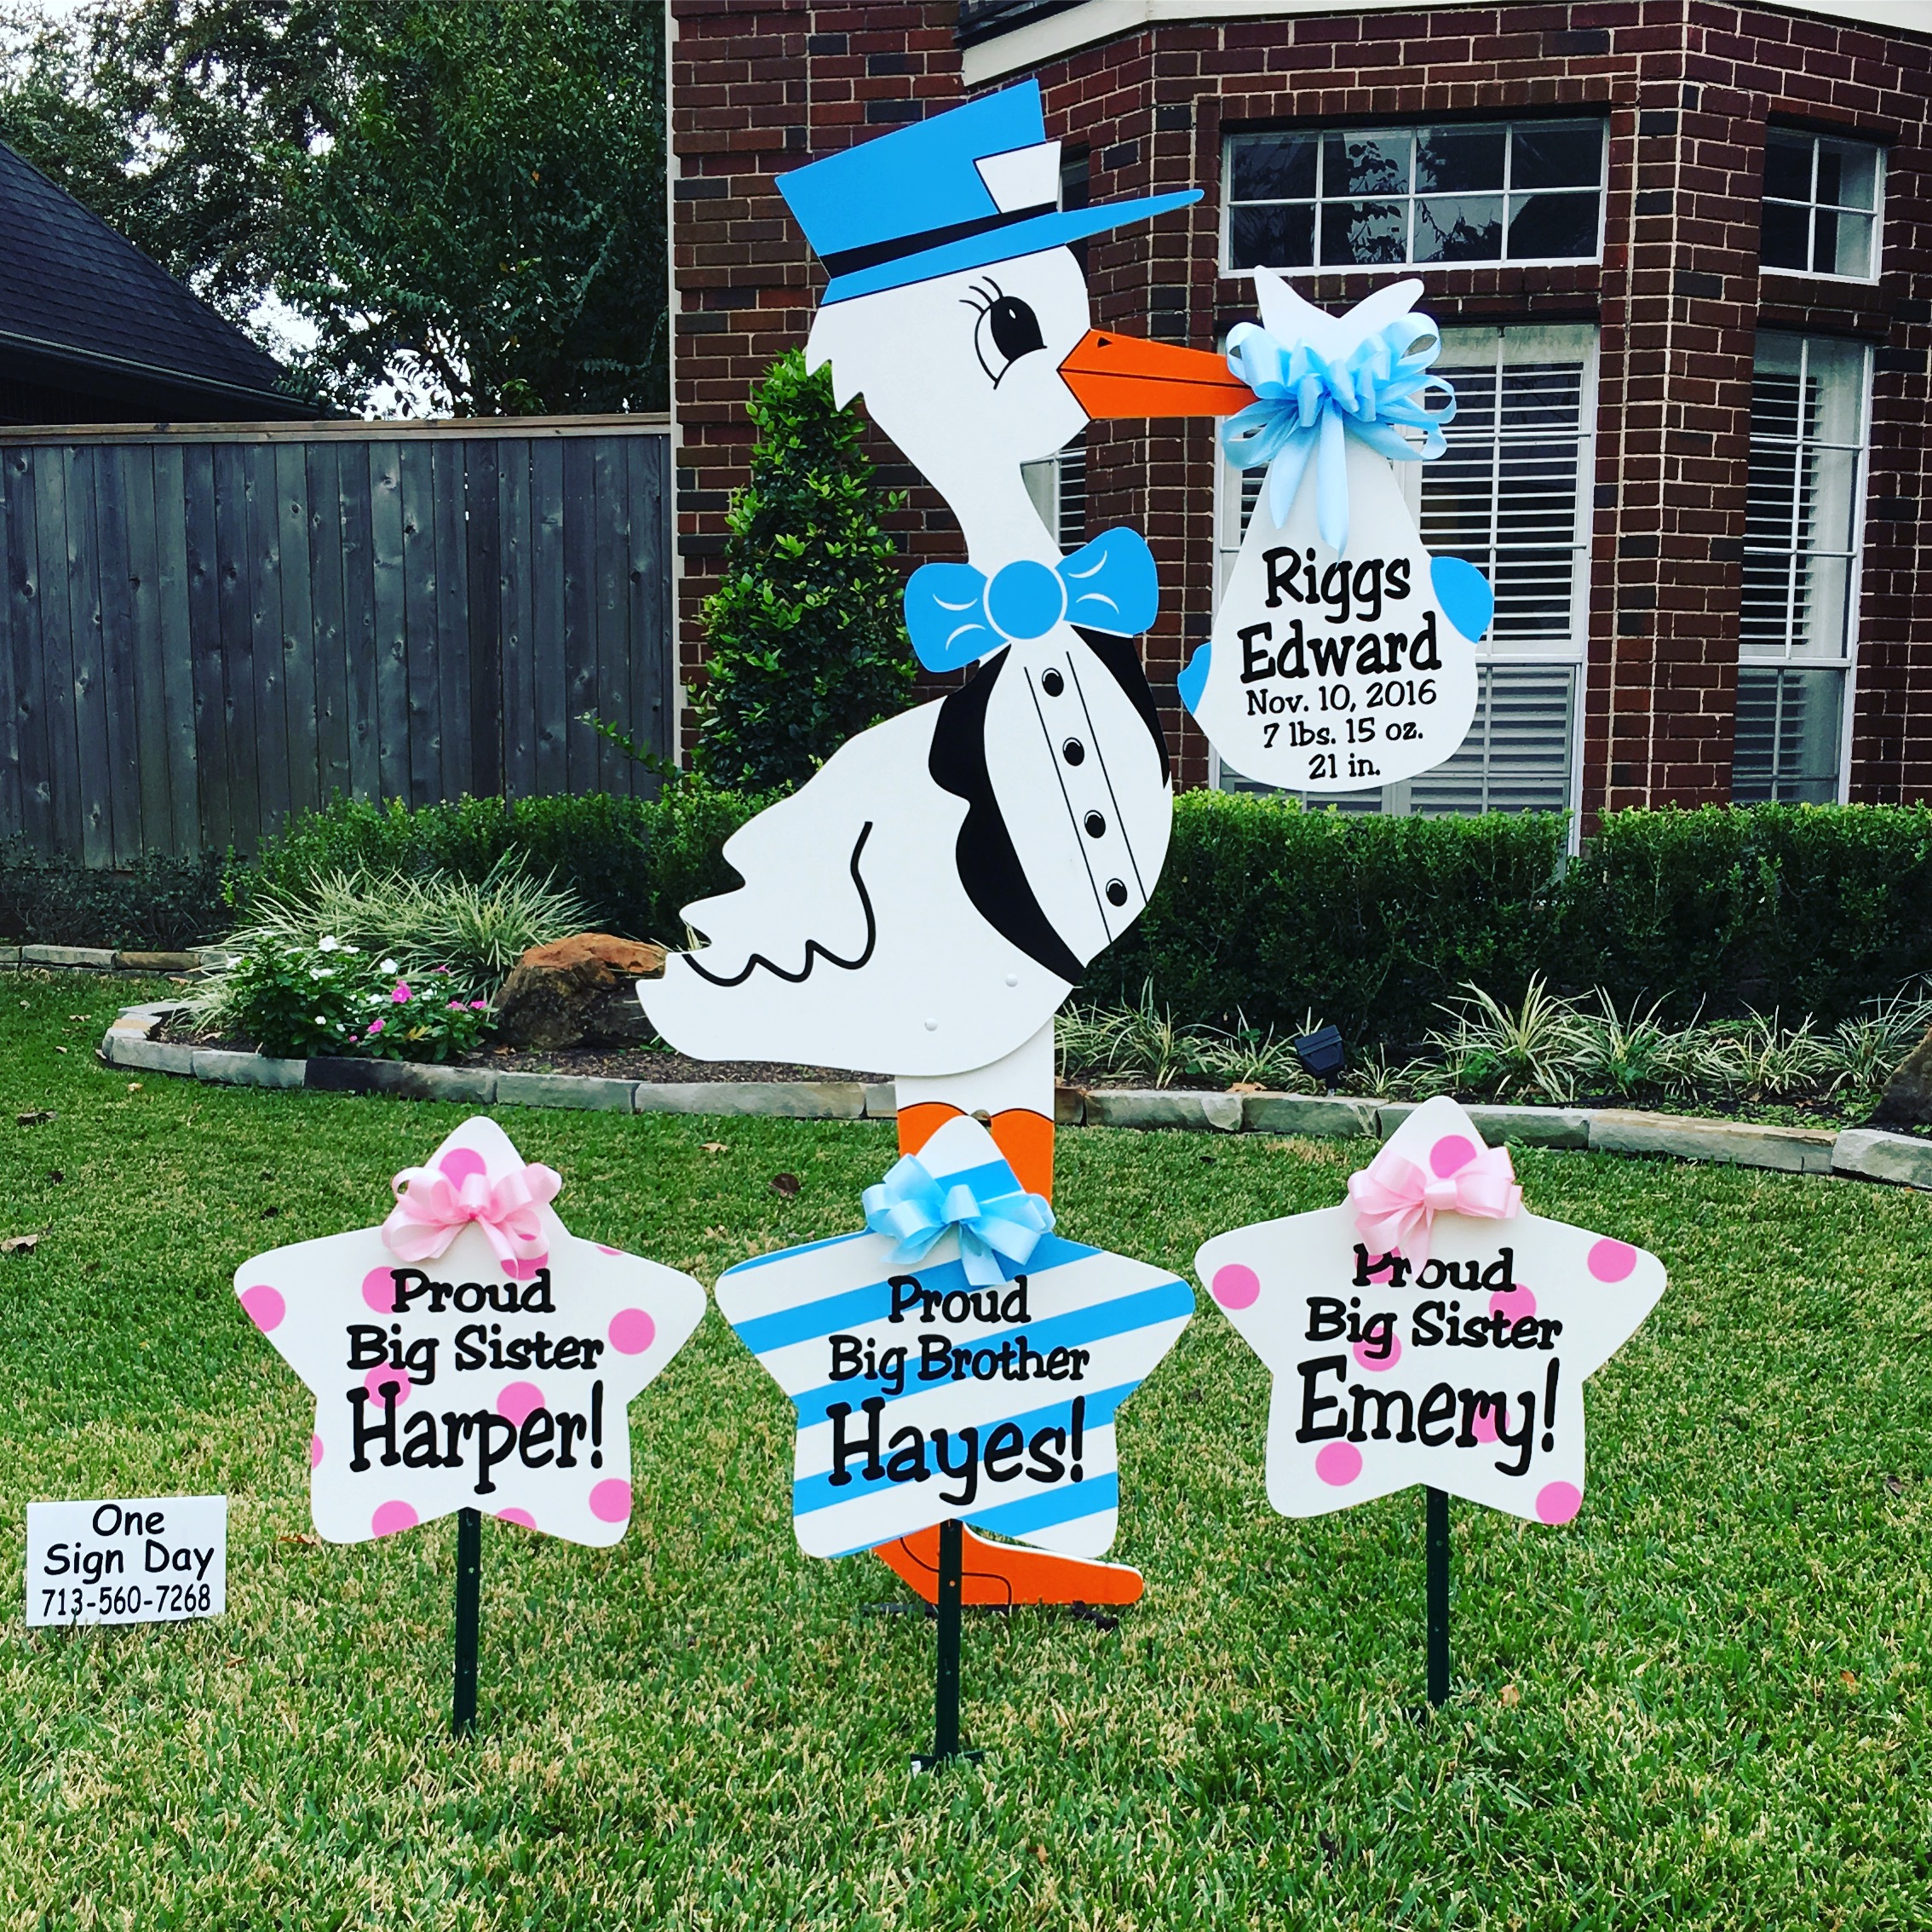 One Sign Day: New Baby and Birthday Sign Rentals Houston, Texas area.